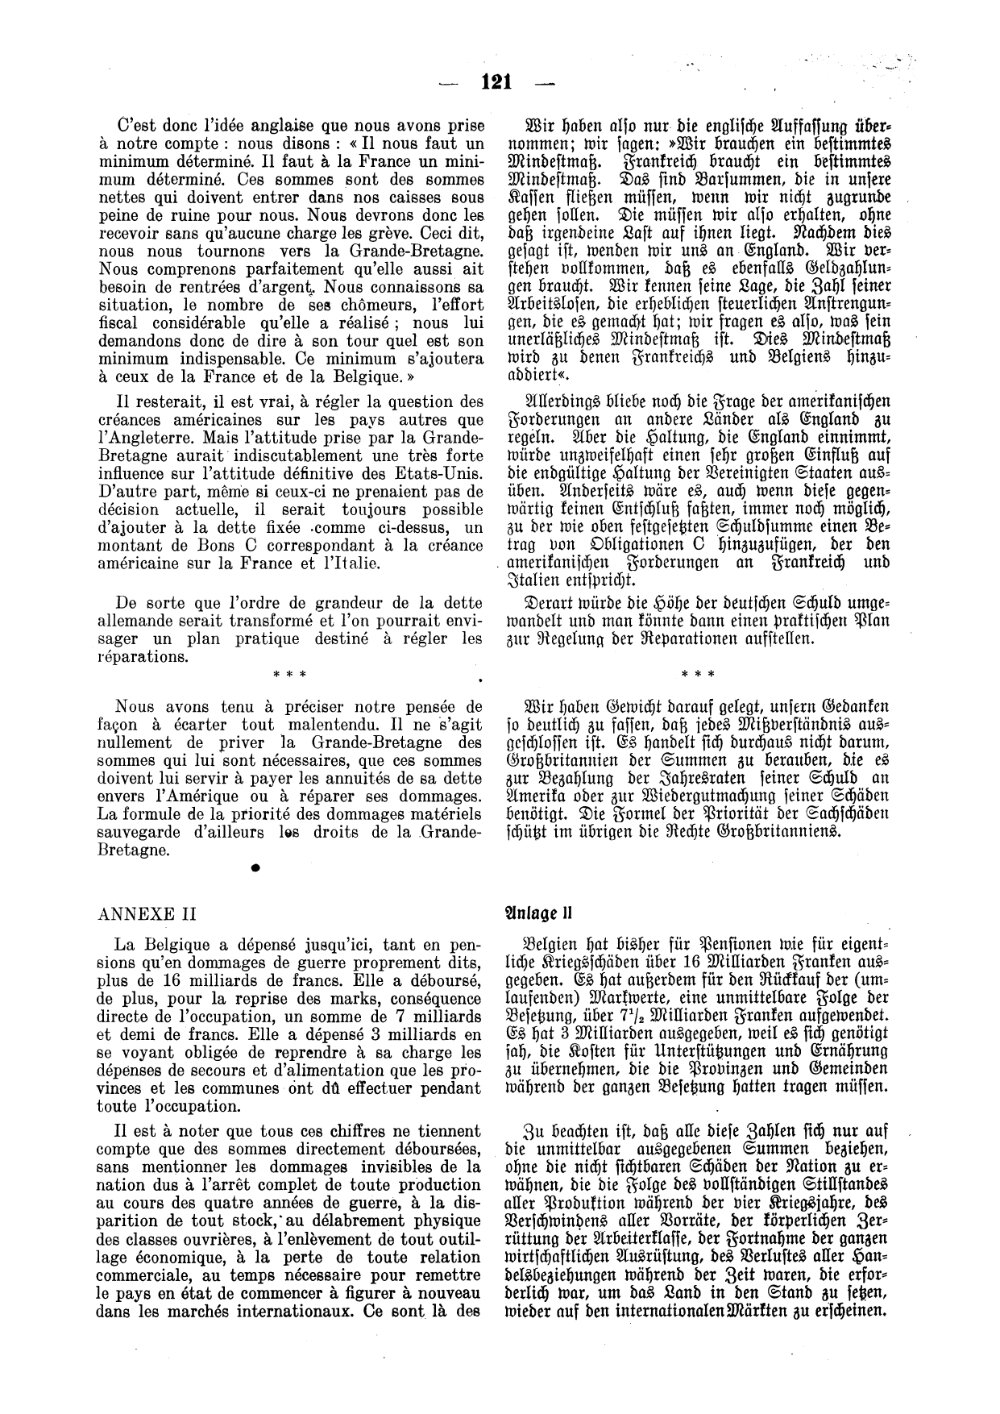 Scan of page 121